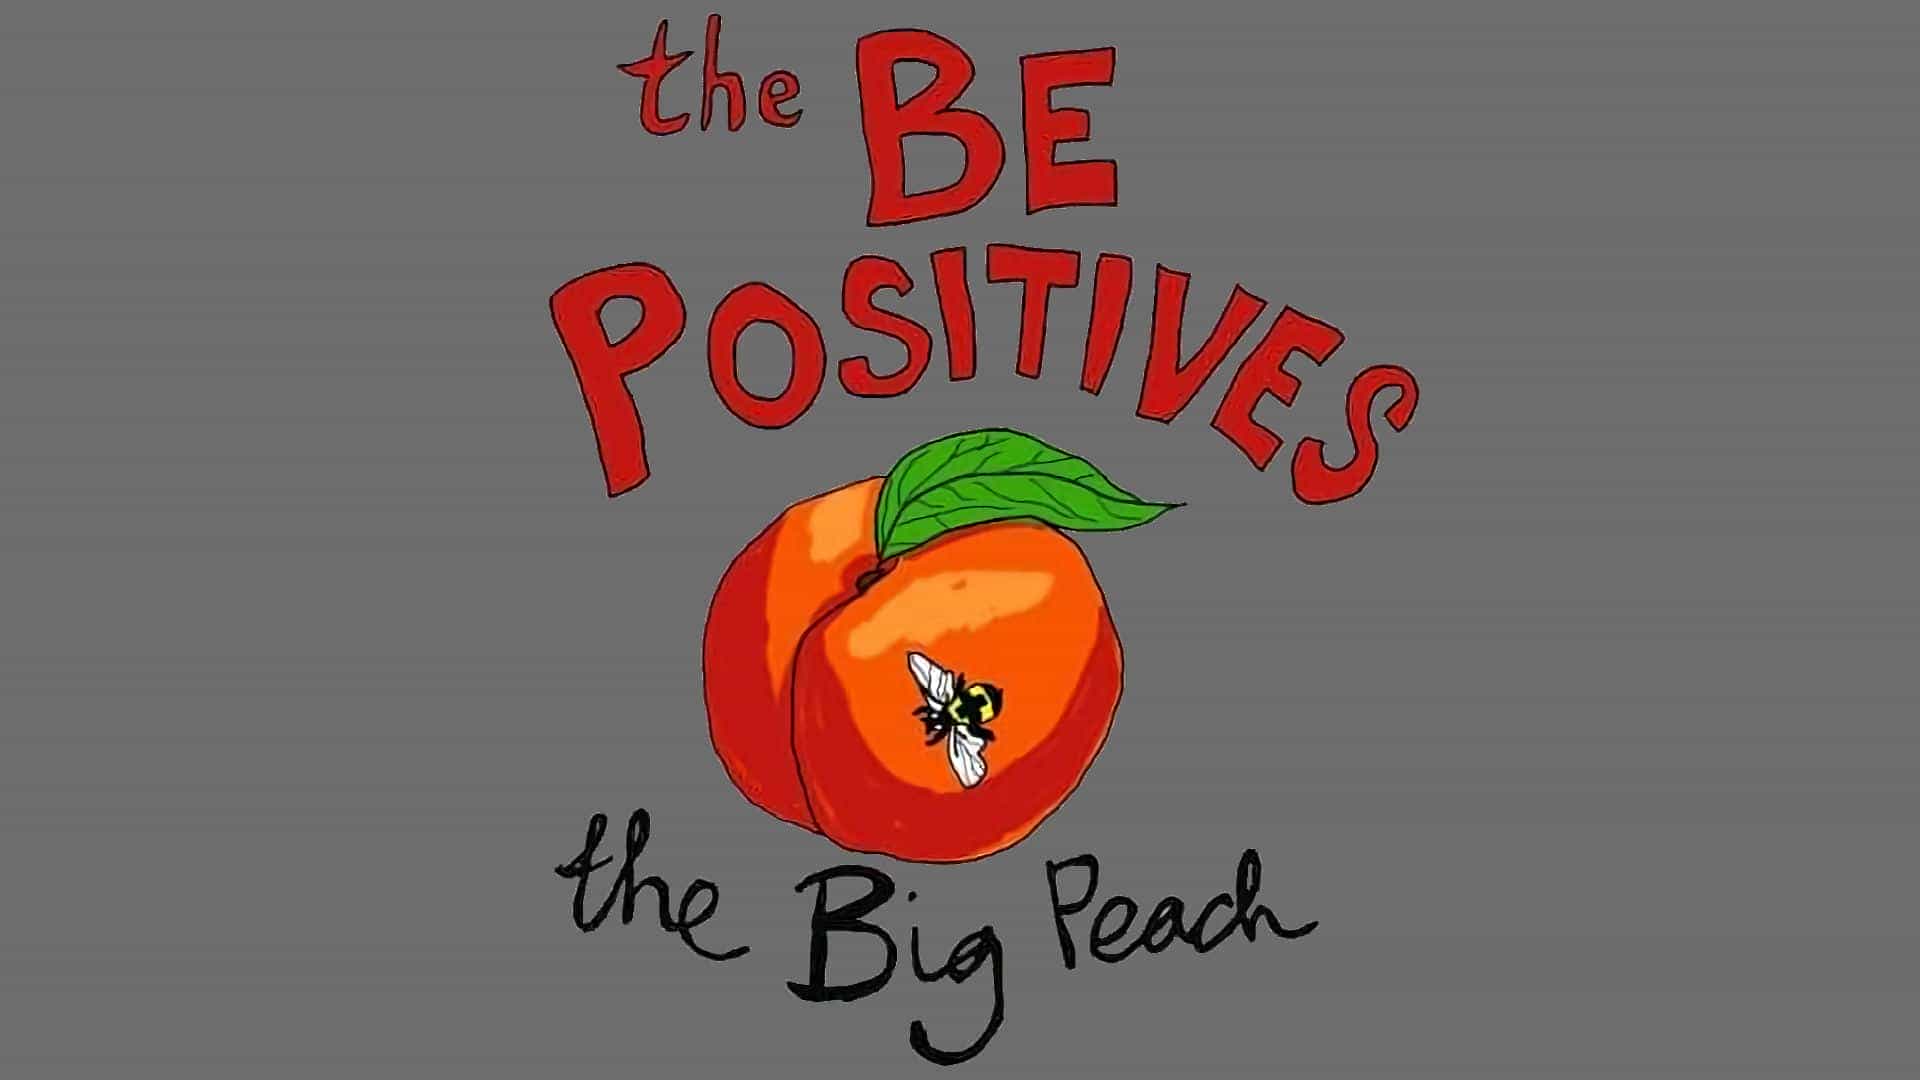 The Be Positives + The Big Peach